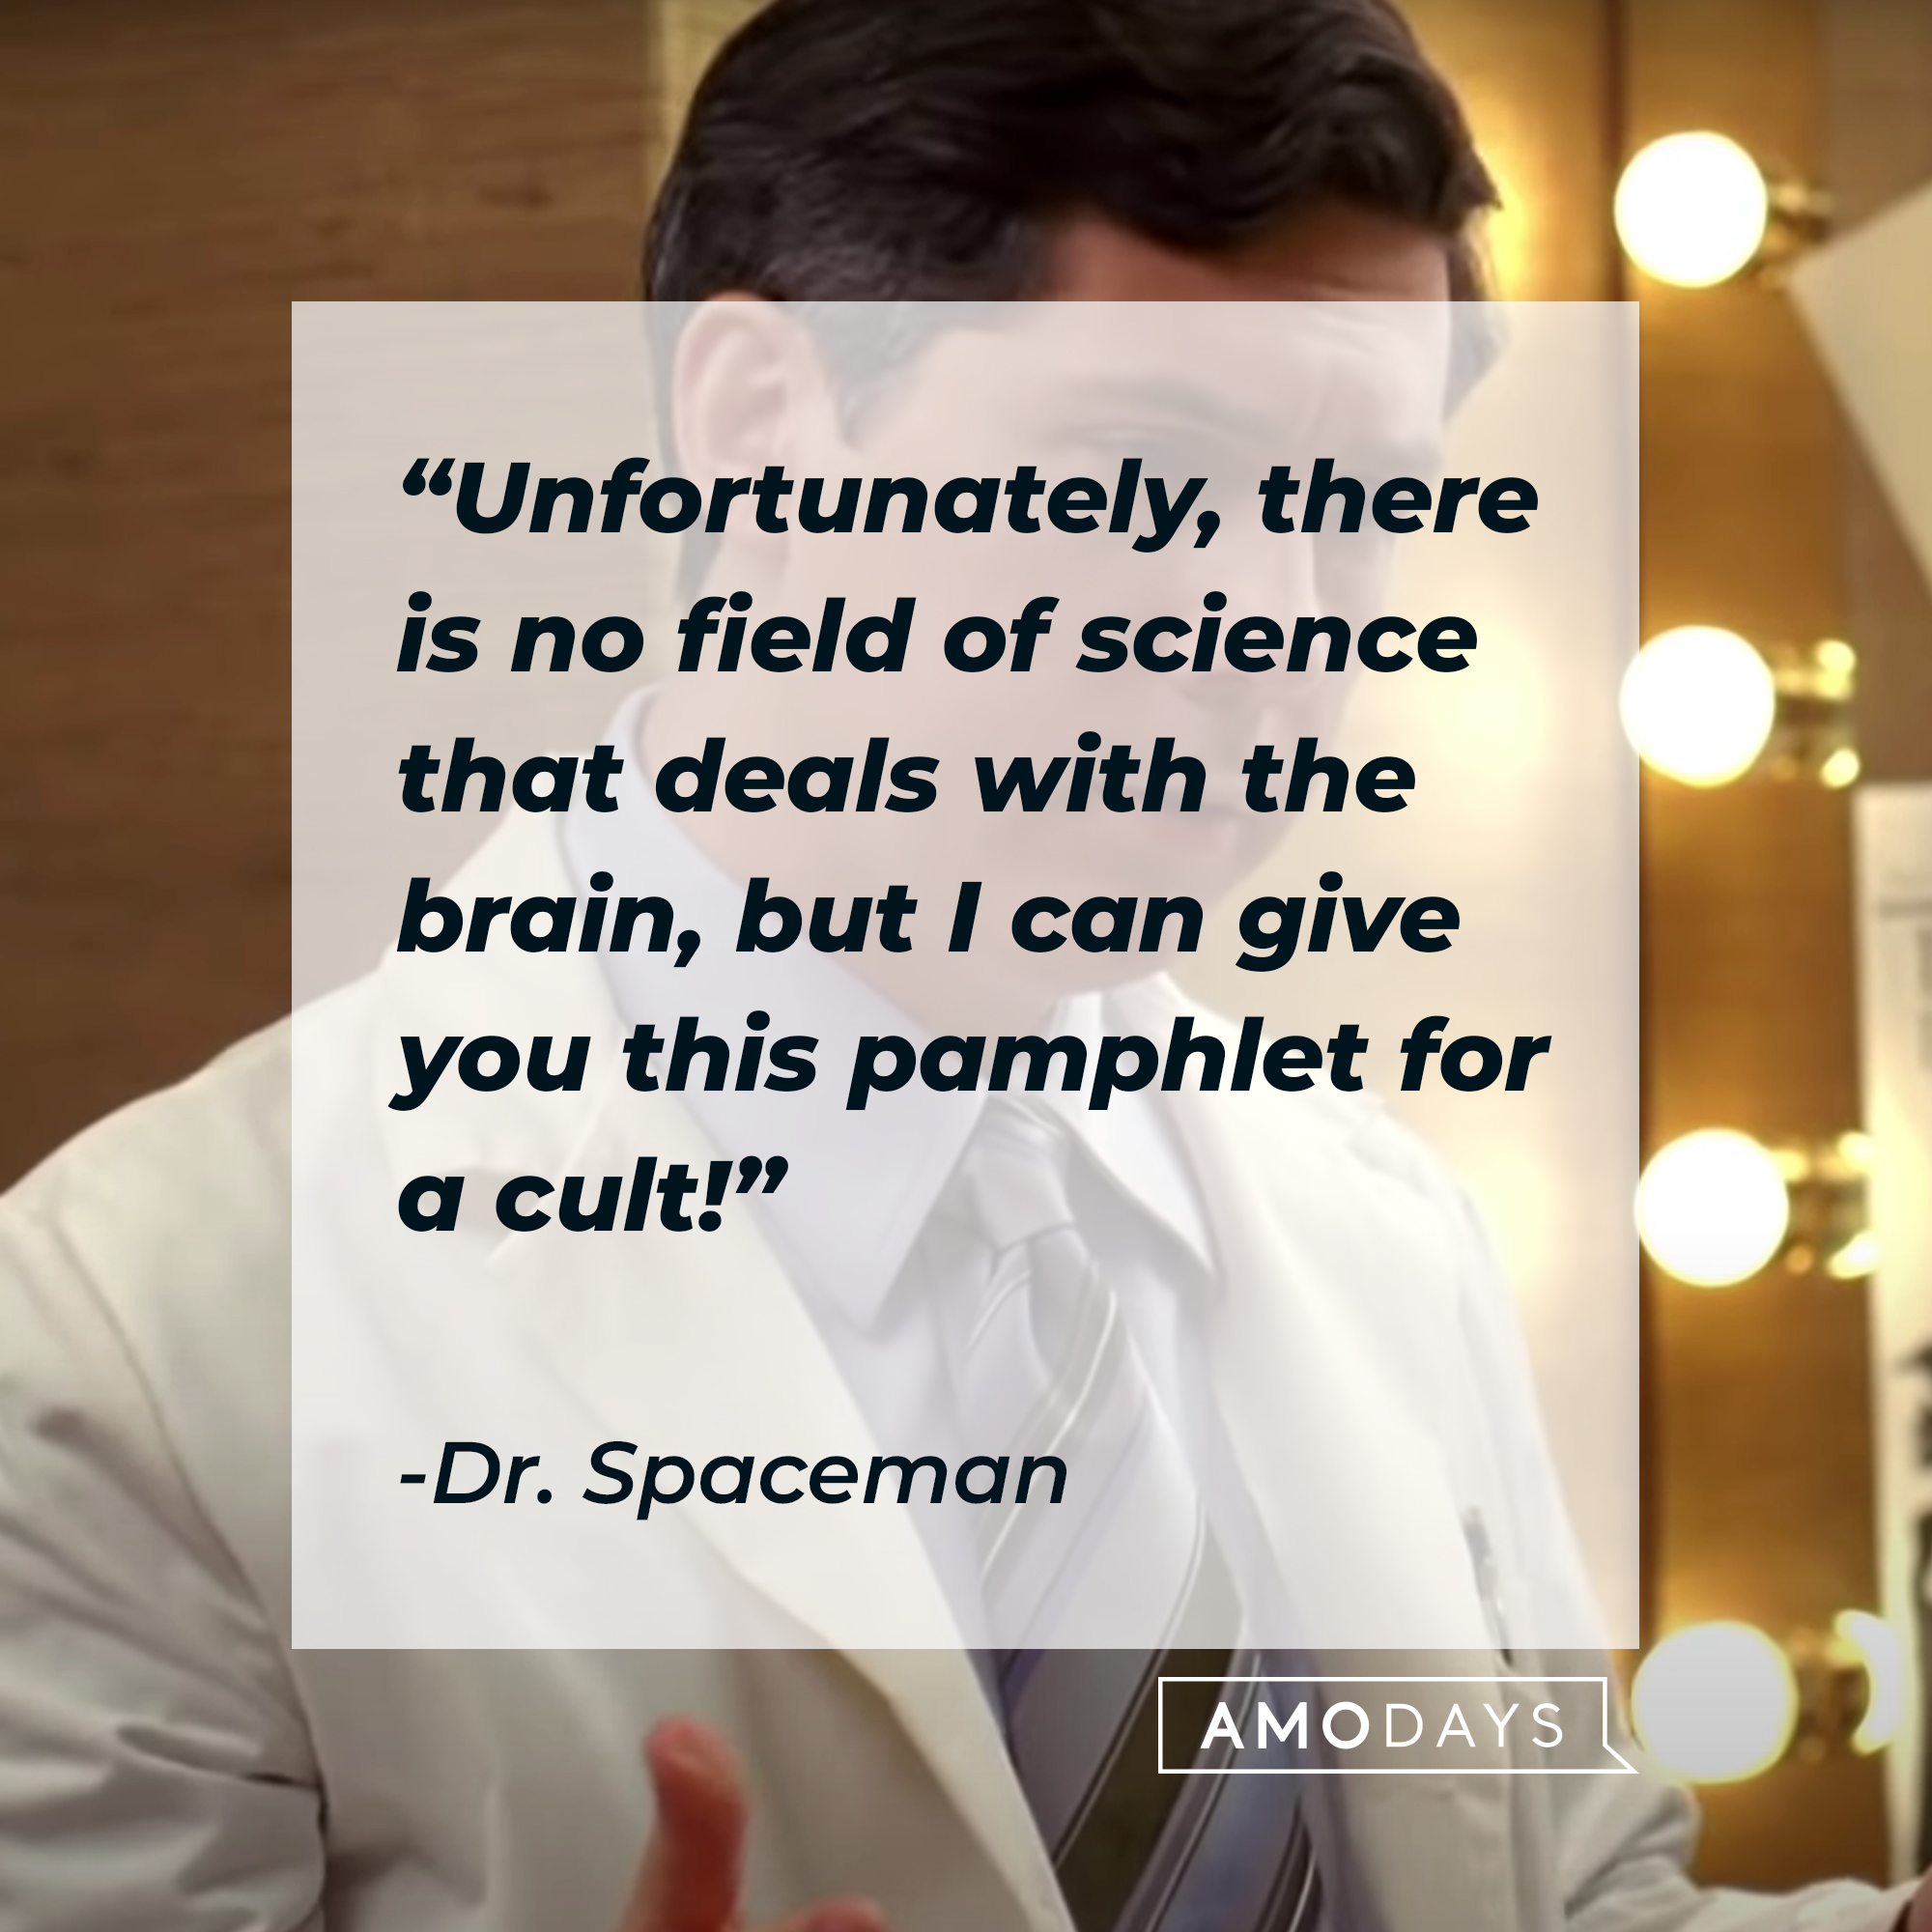 Dr. Spaceman's quote: "Unfortunately, there is no field of science that deals with the brain, but I can give you this pamphlet for a cult!" | Source: youtube.com/30Rock